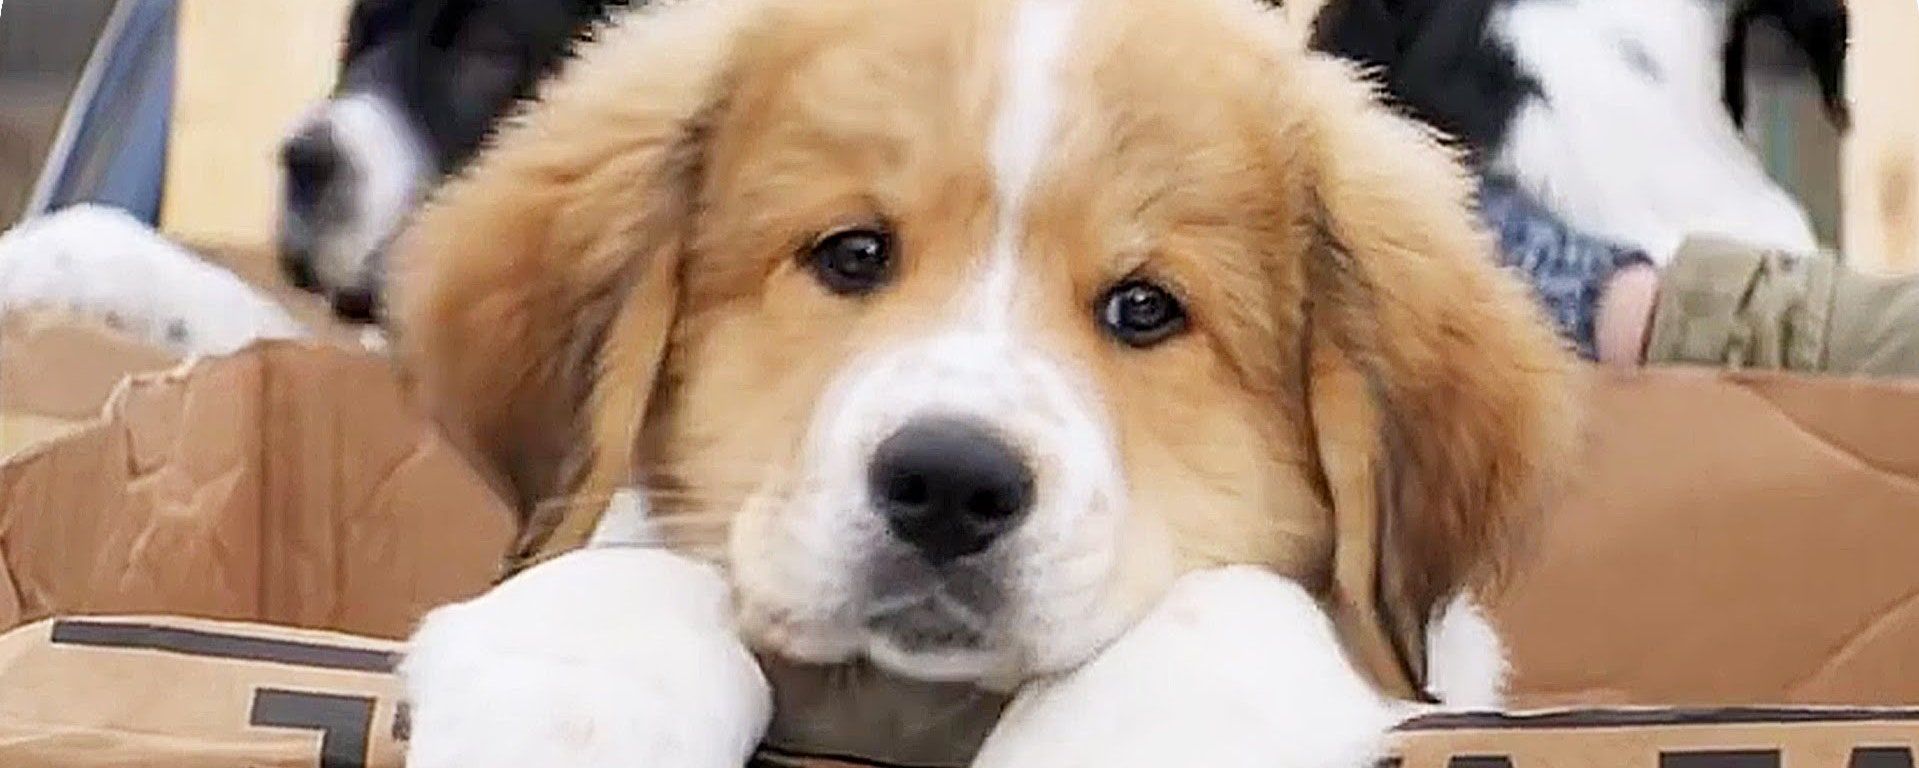 A Dog's Purpose' Premiere Cancelled After Animal Cruelty Controversy